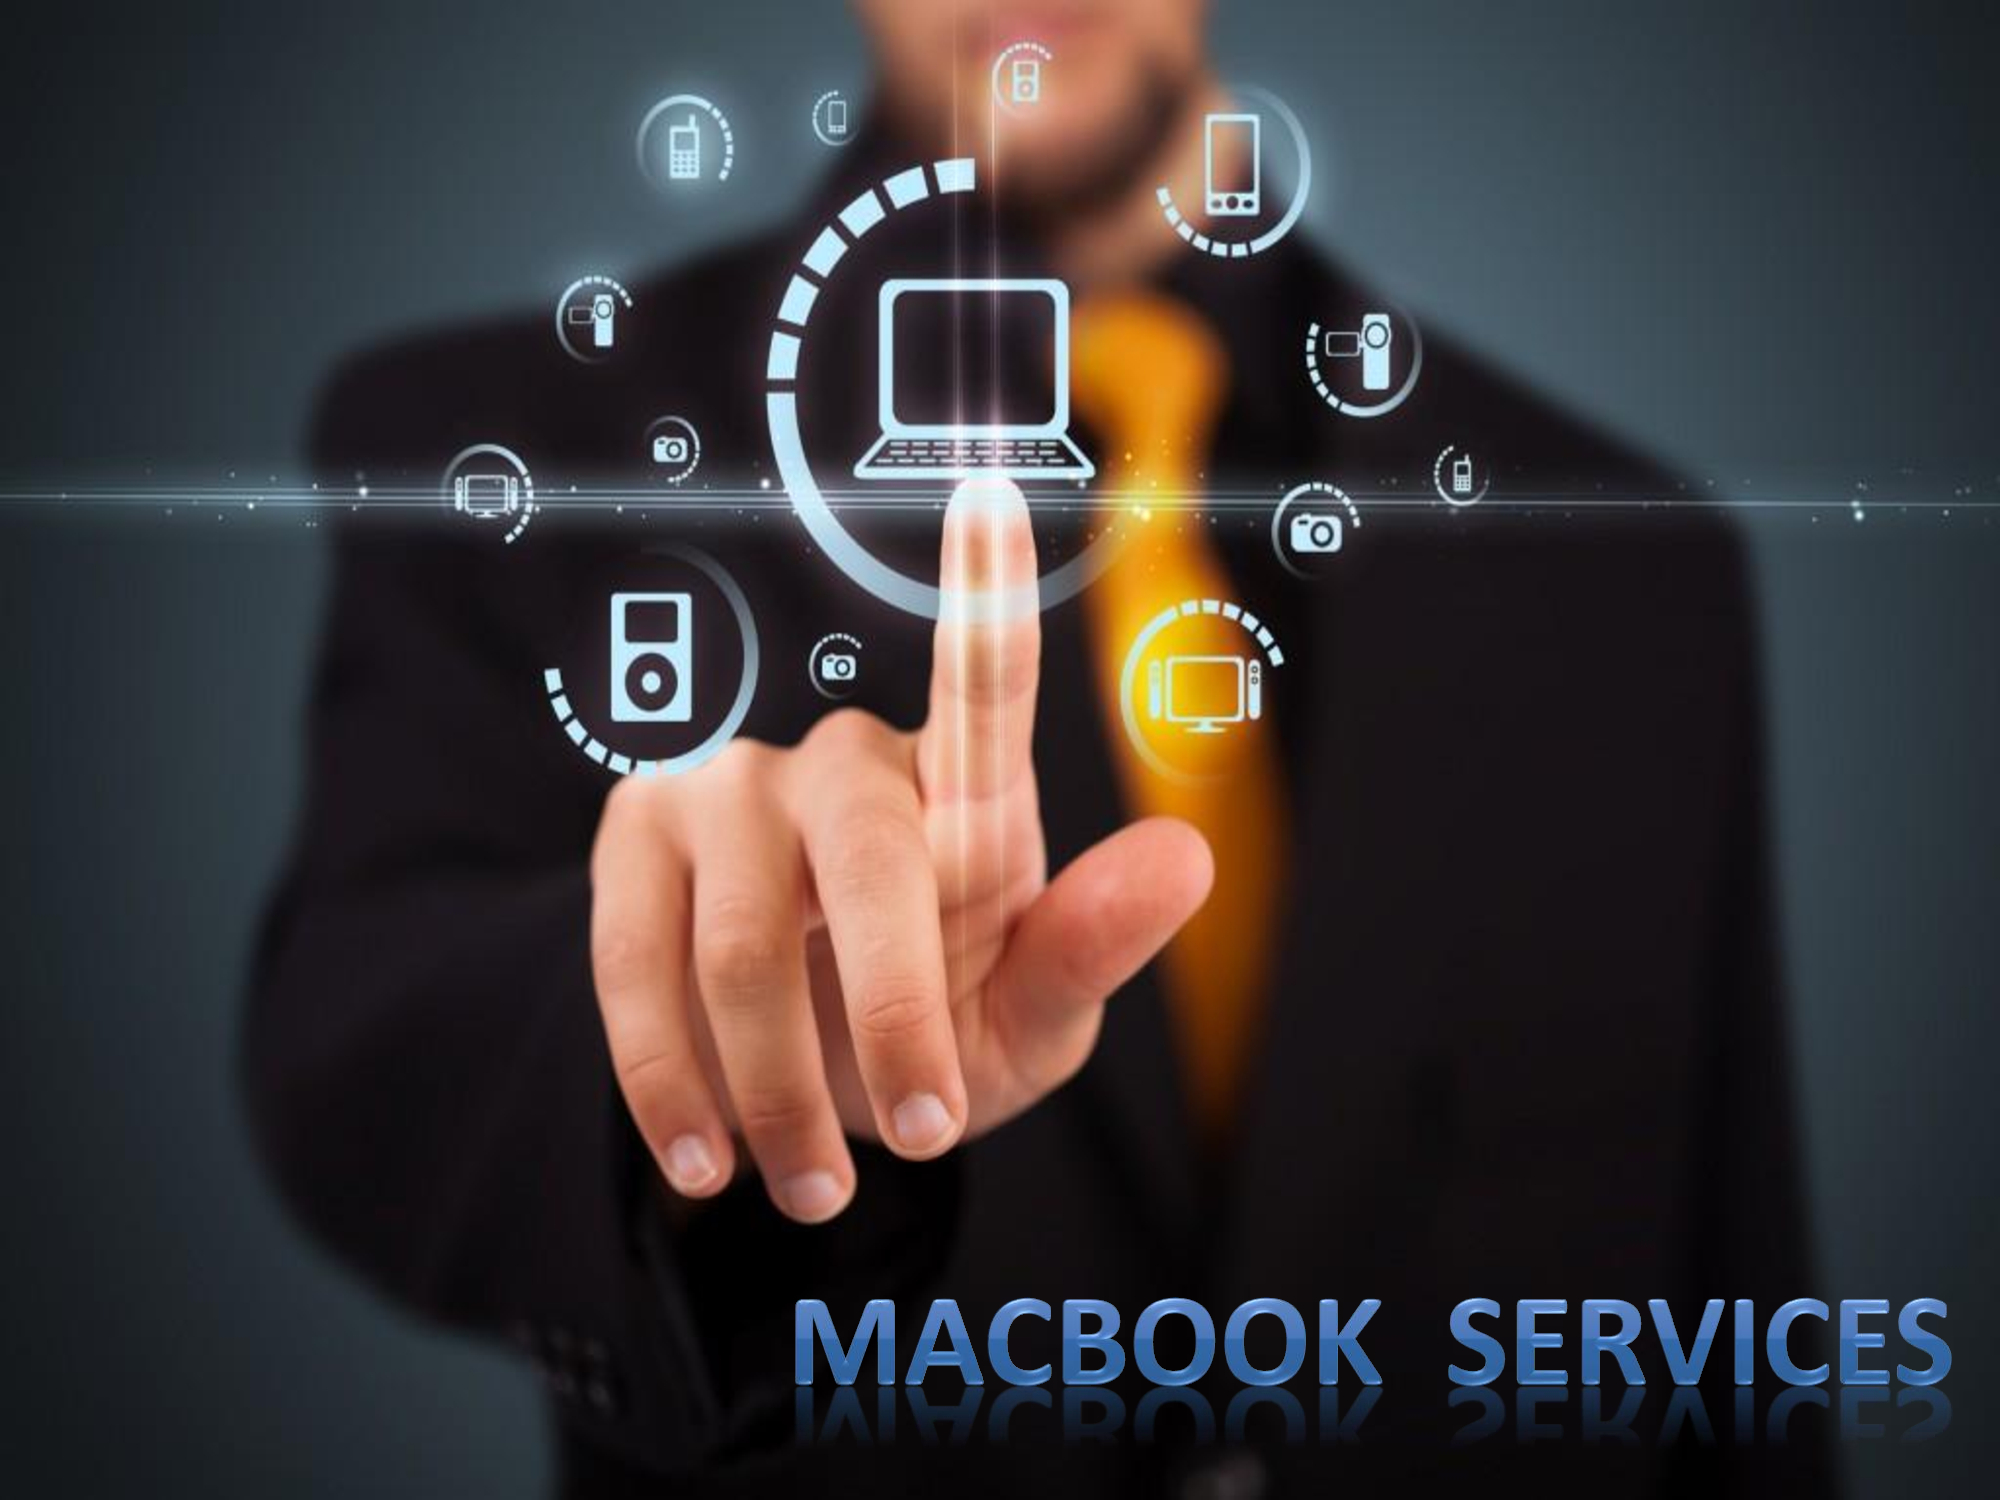 How To Find The Best MacBook Repair Services In Dubai?